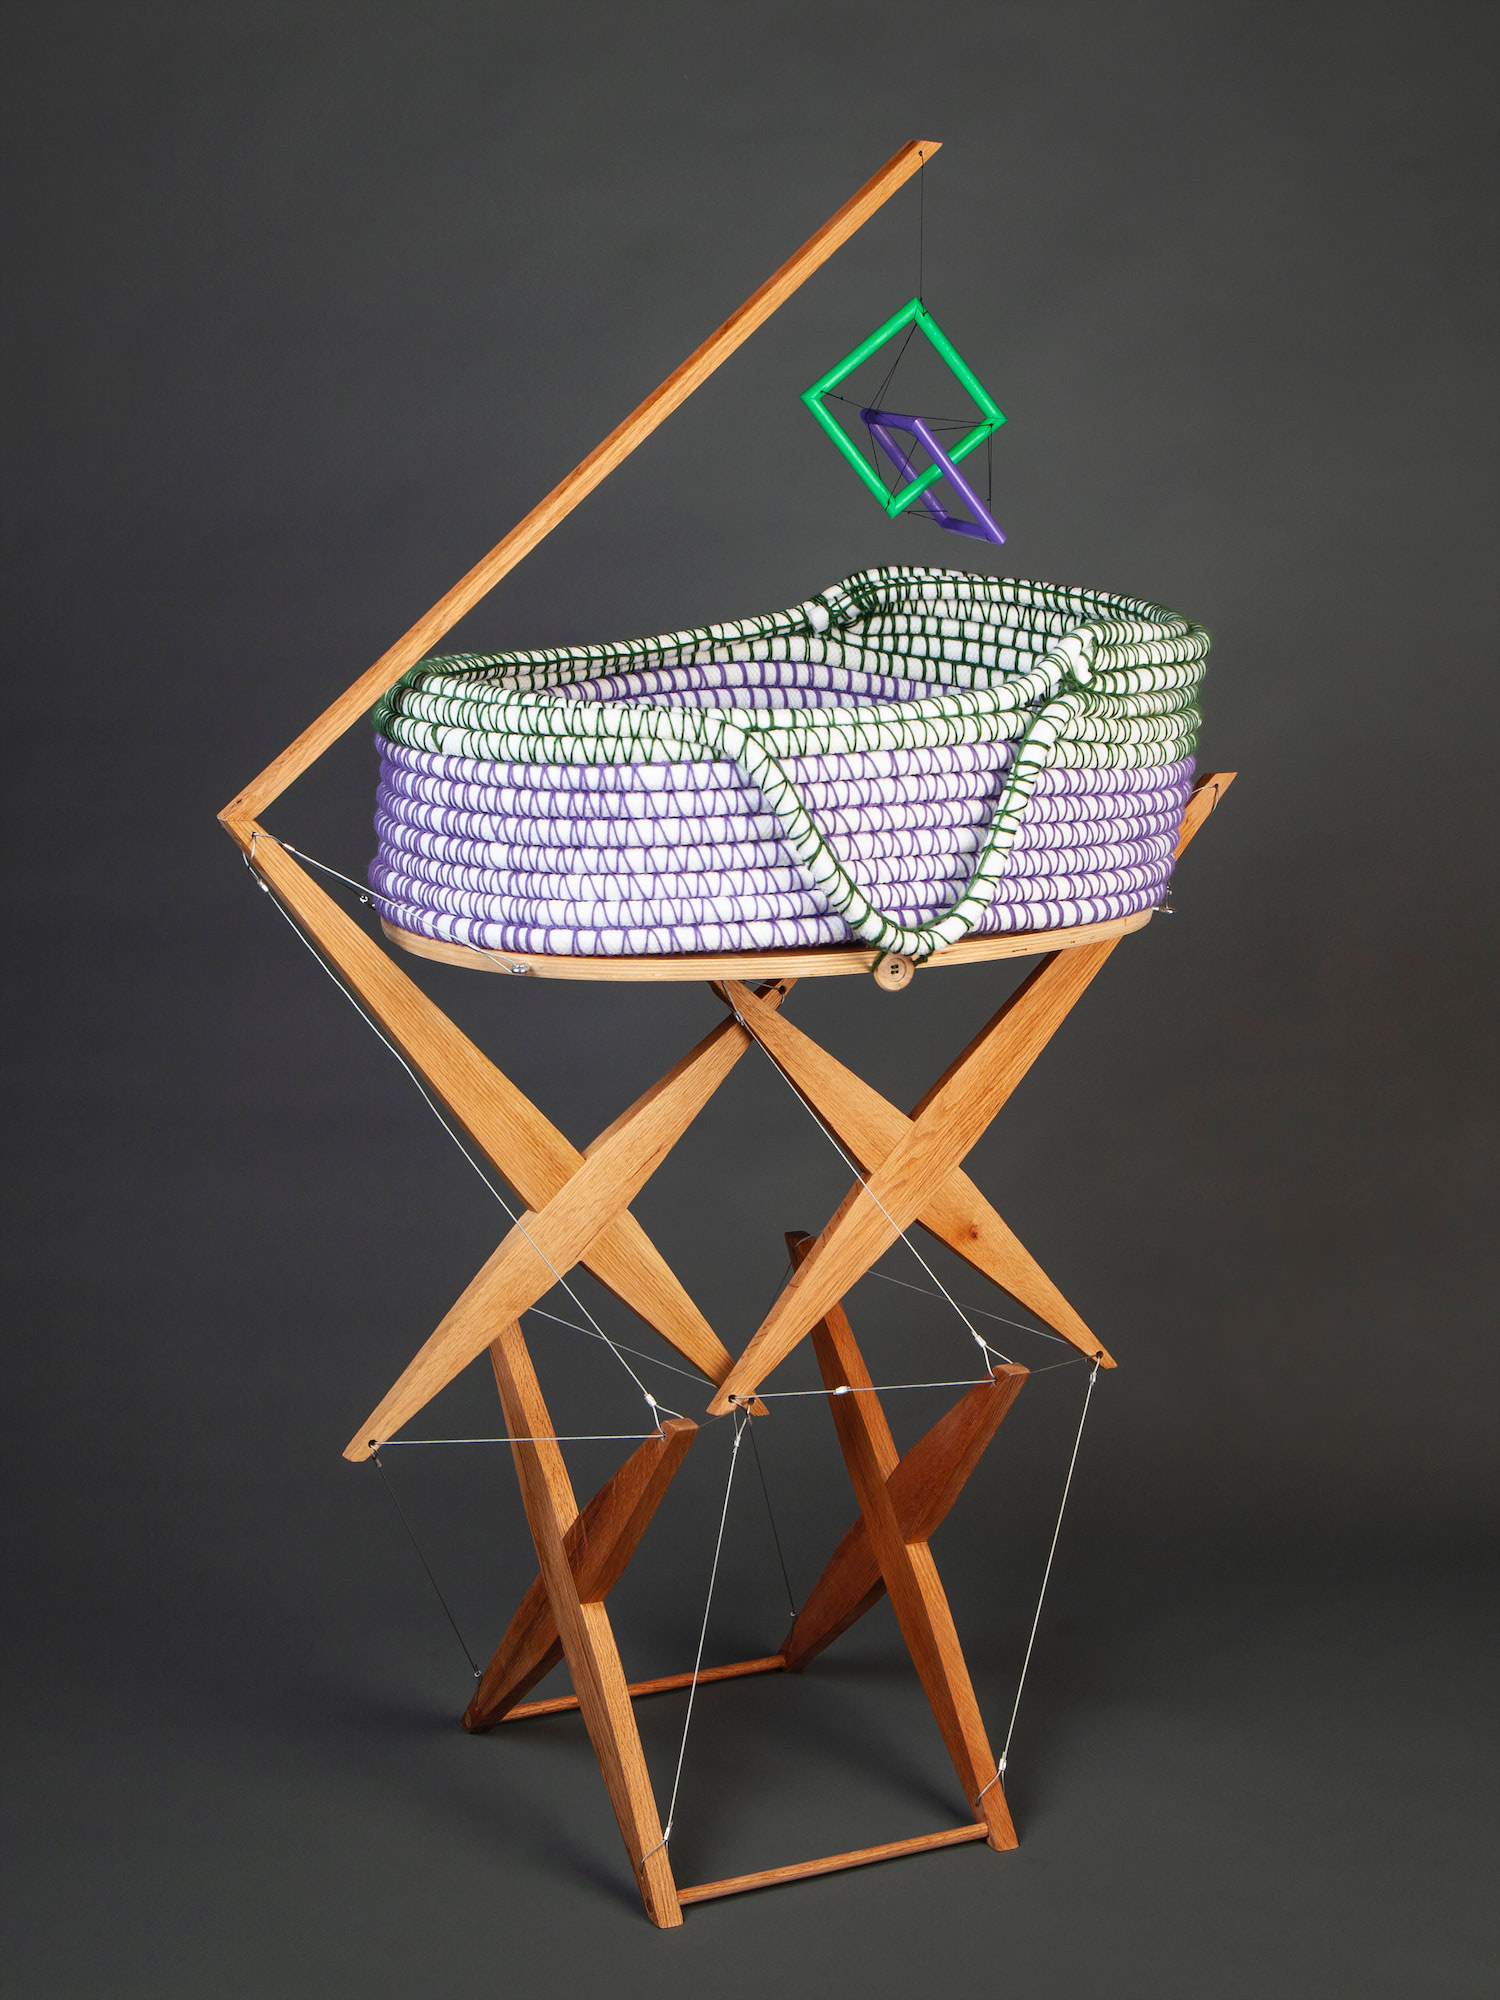 Tensegrity bassinet on a wood structure with a hanging tensegrity mobile and hand crocheted basket. wooden structure is made of two x-like pieces on the ground and two more x-like pieces suspended perpendicularly above them. Steel chords are attached at all four ends of all four x's. The hand crocheted basket is made from coiled 3/4